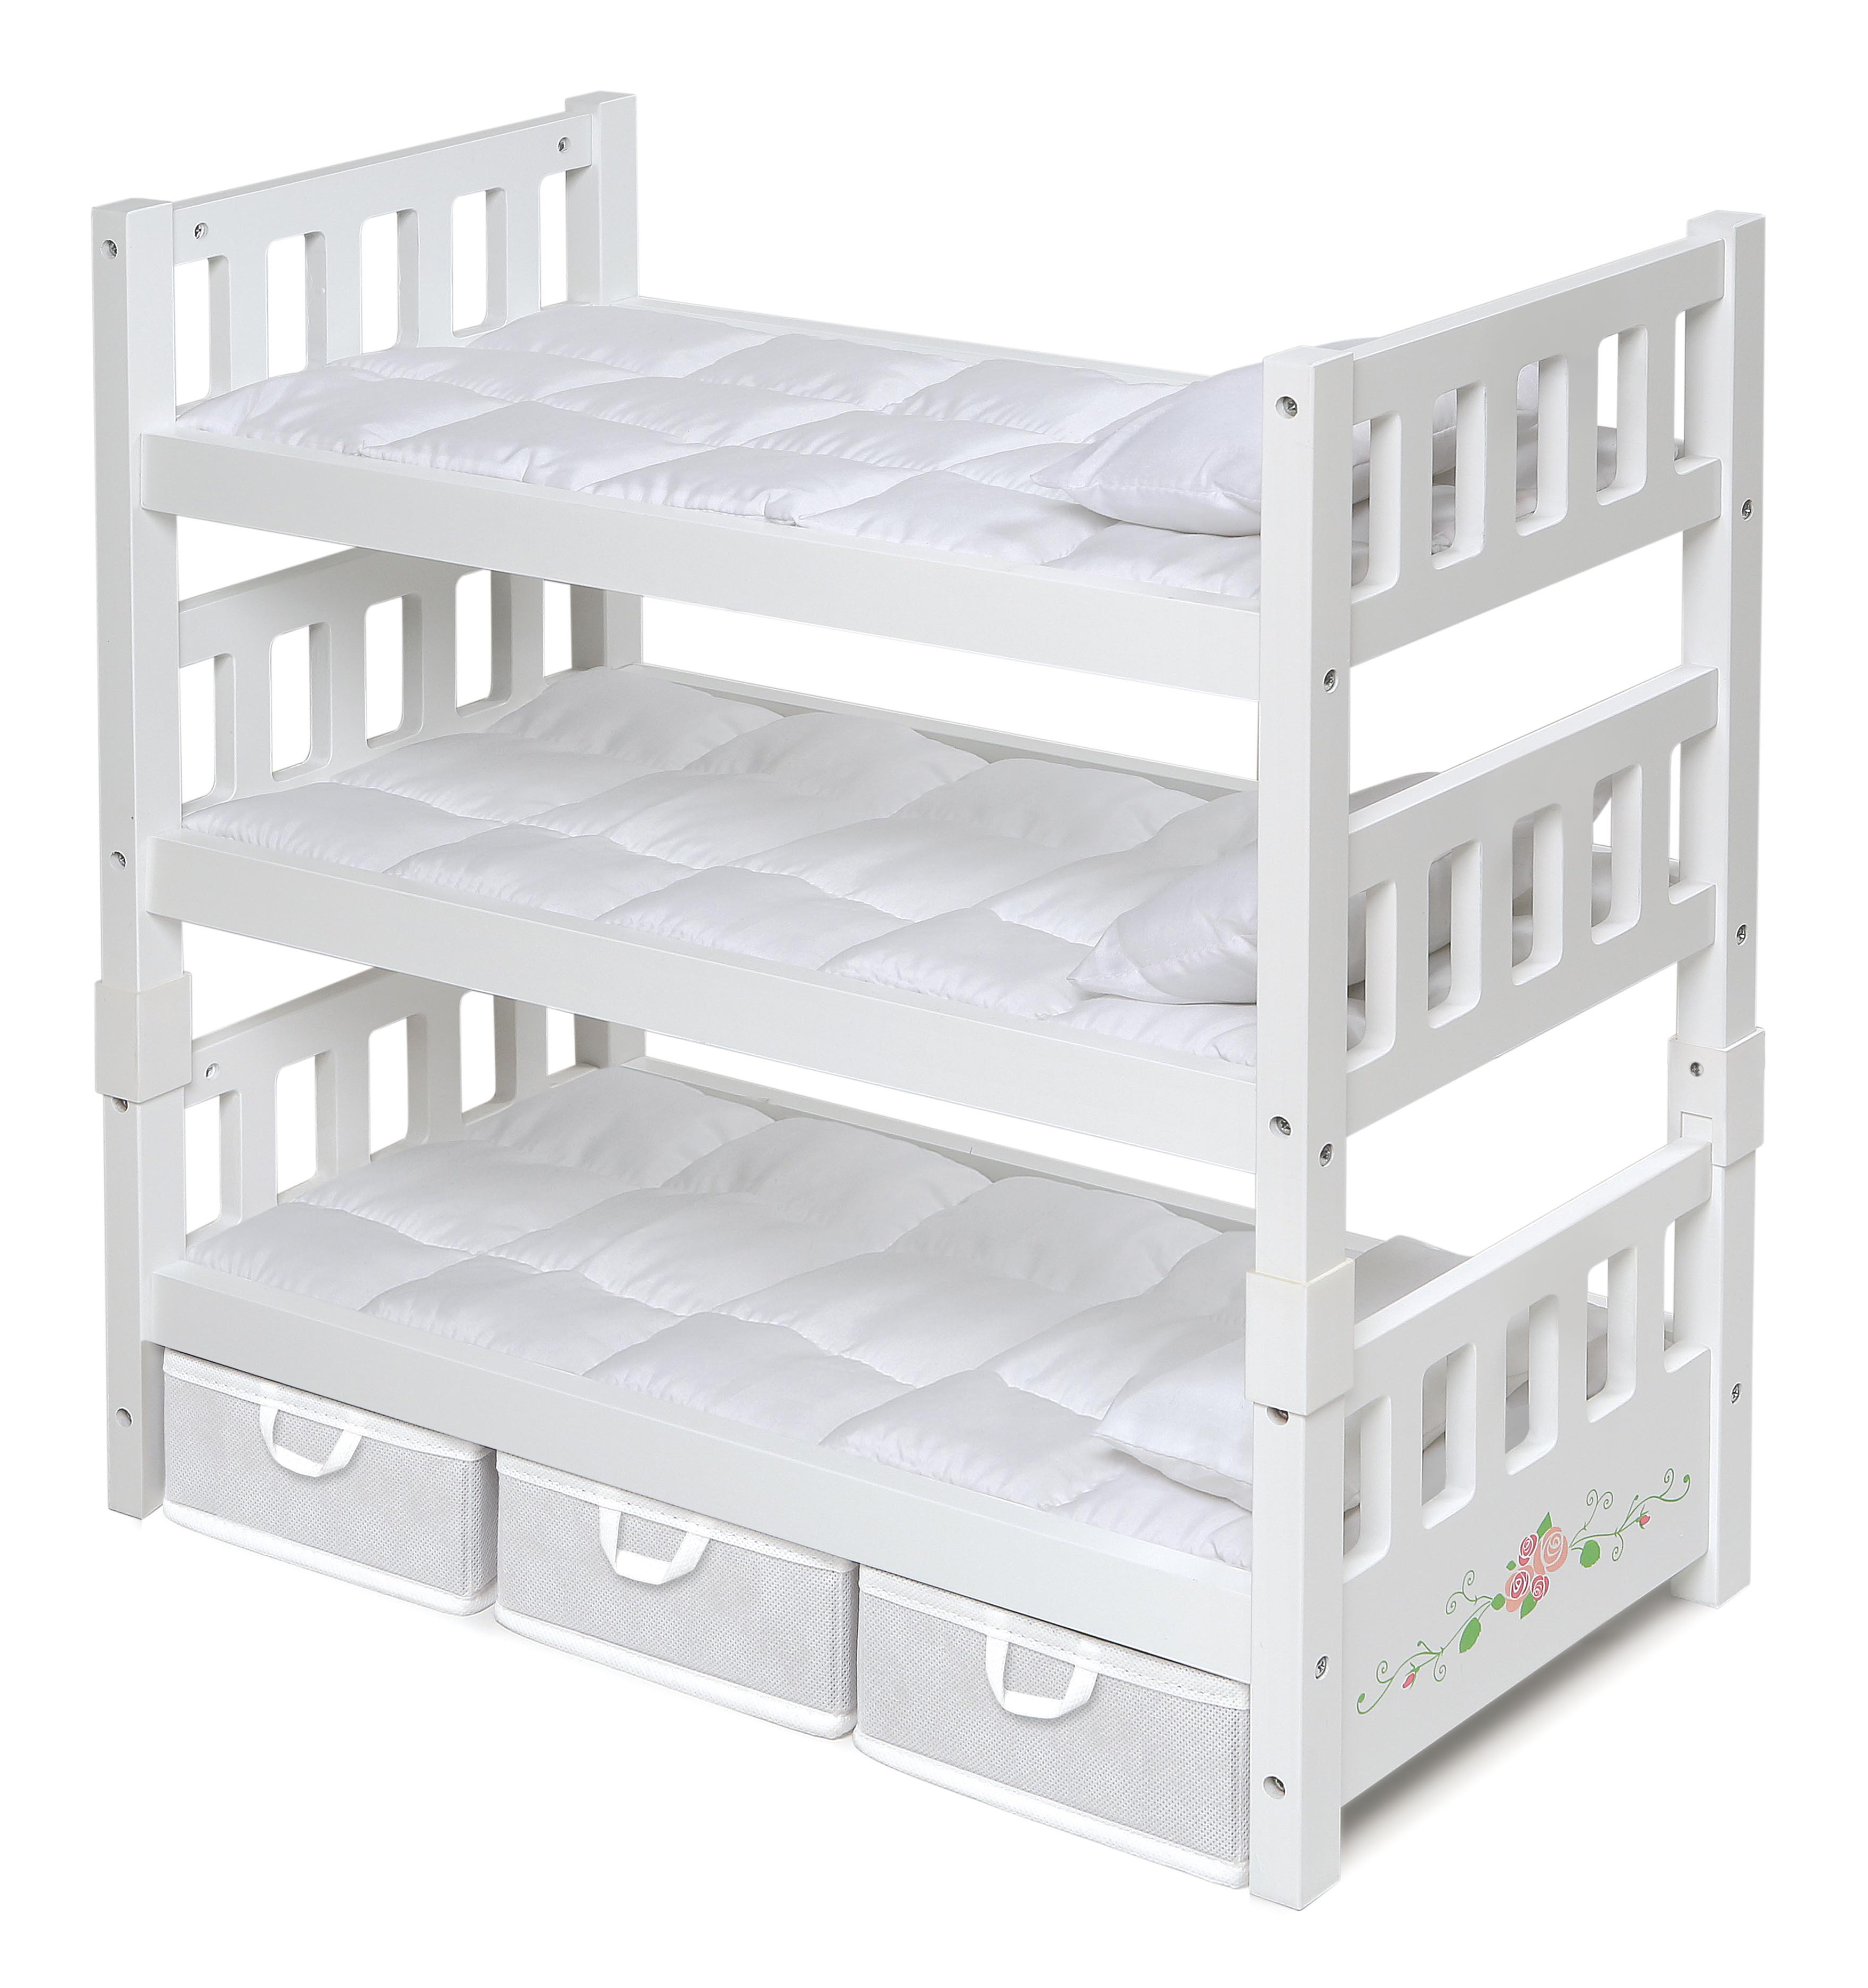 1-2-3 Convertible Doll Bunk Bed with Bedding, Baskets and Free Personalization Kit - White Rose